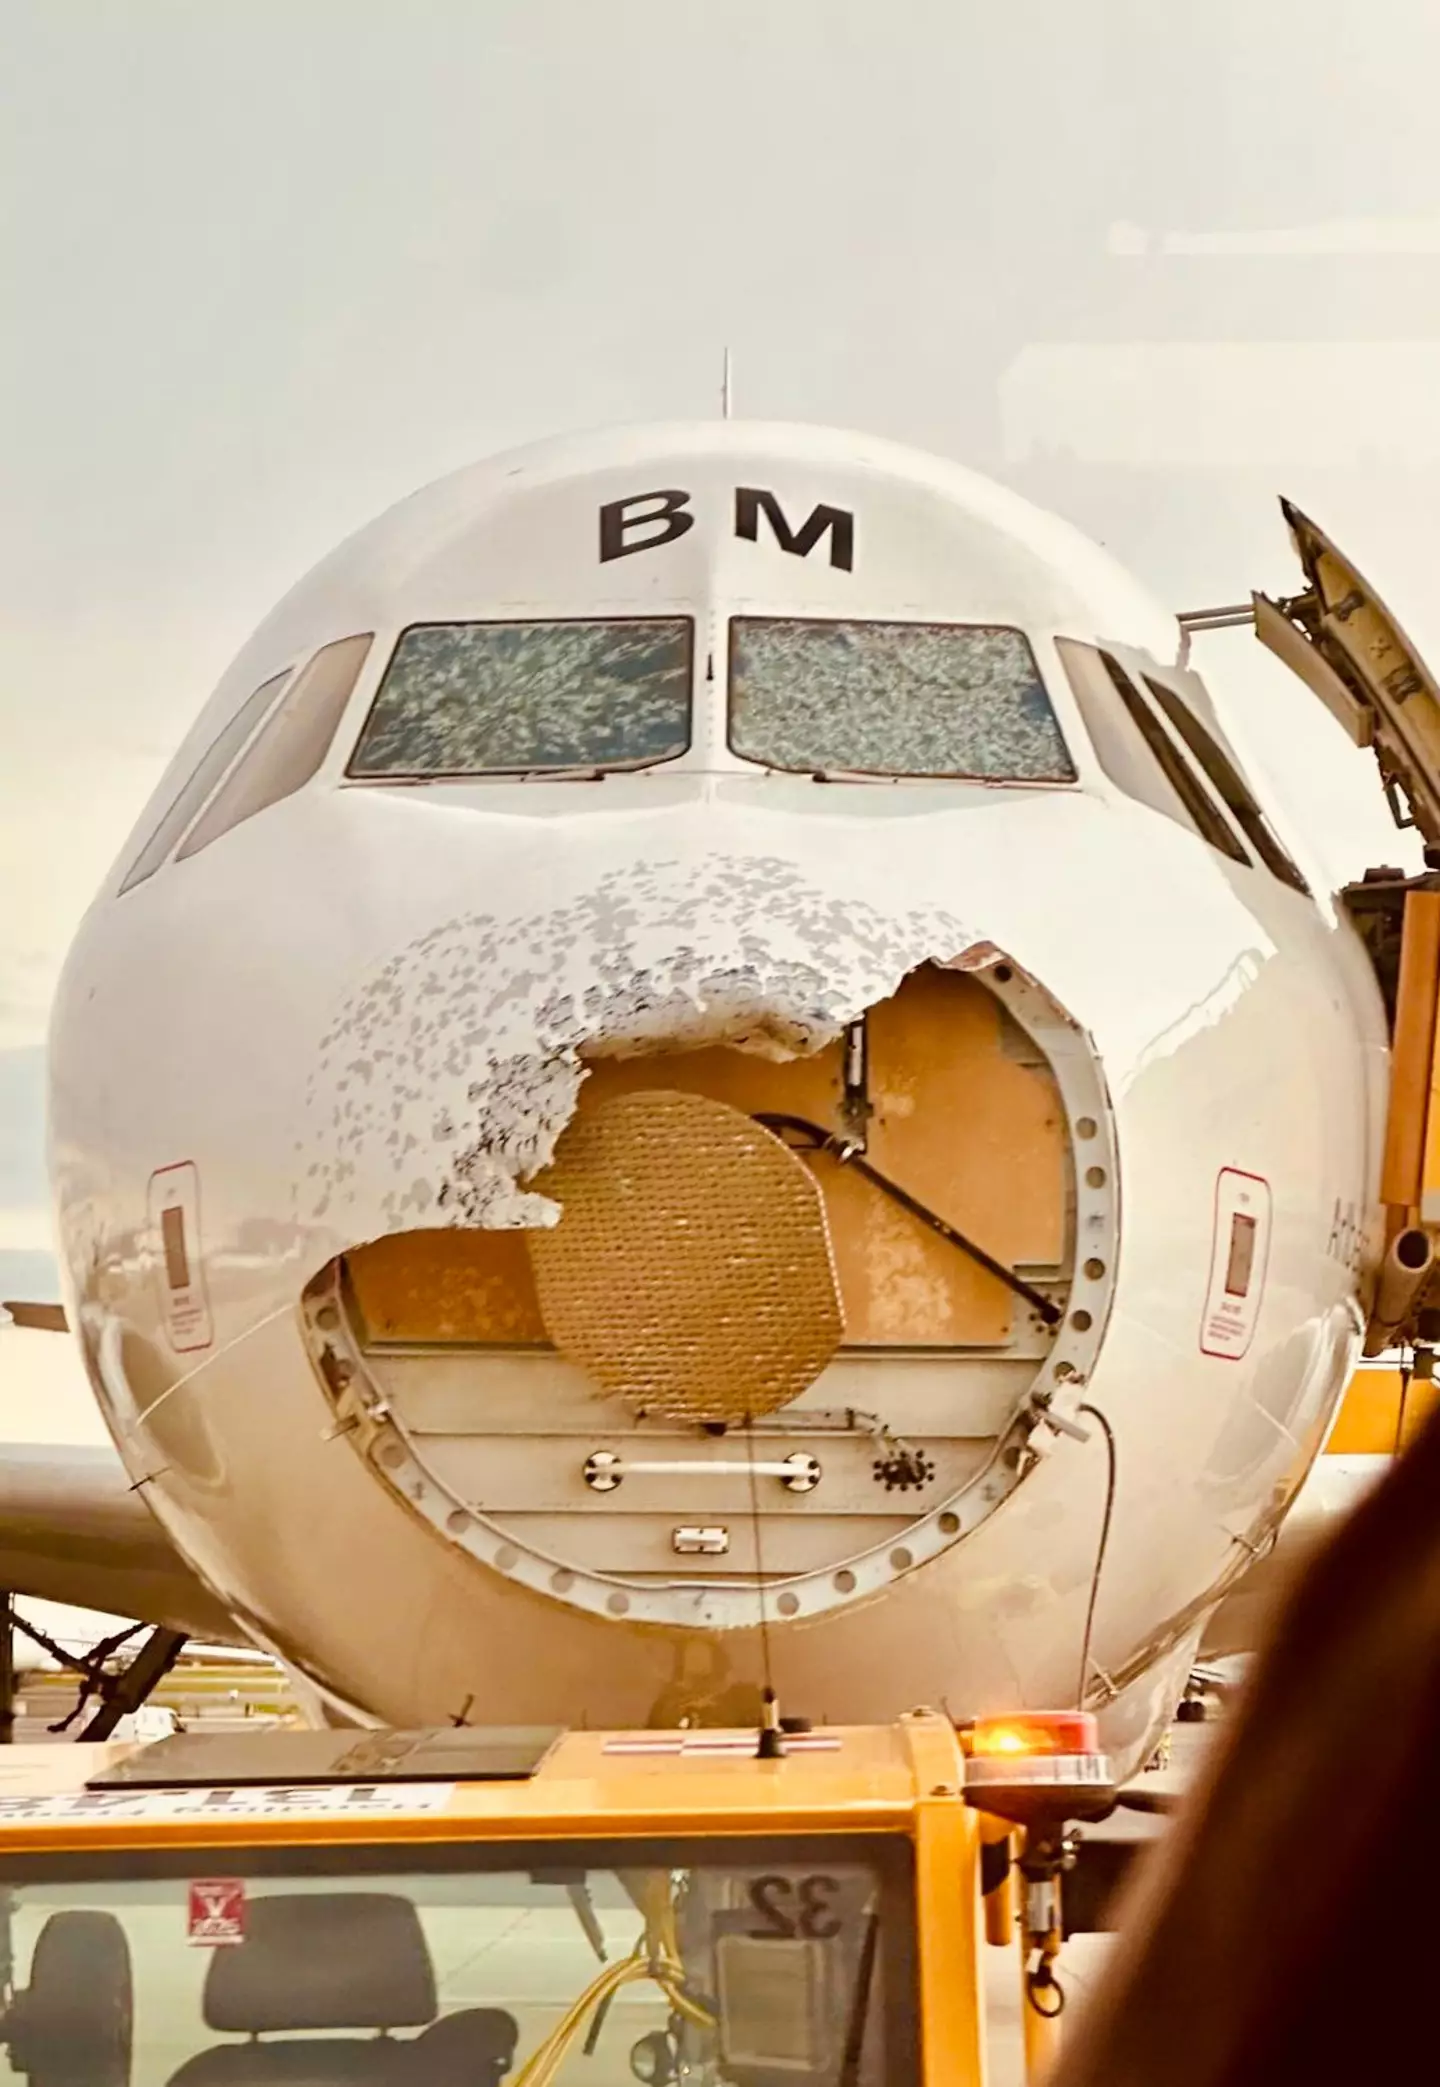 The front of the plane was battered by the storm. (@SLCScanner/X)